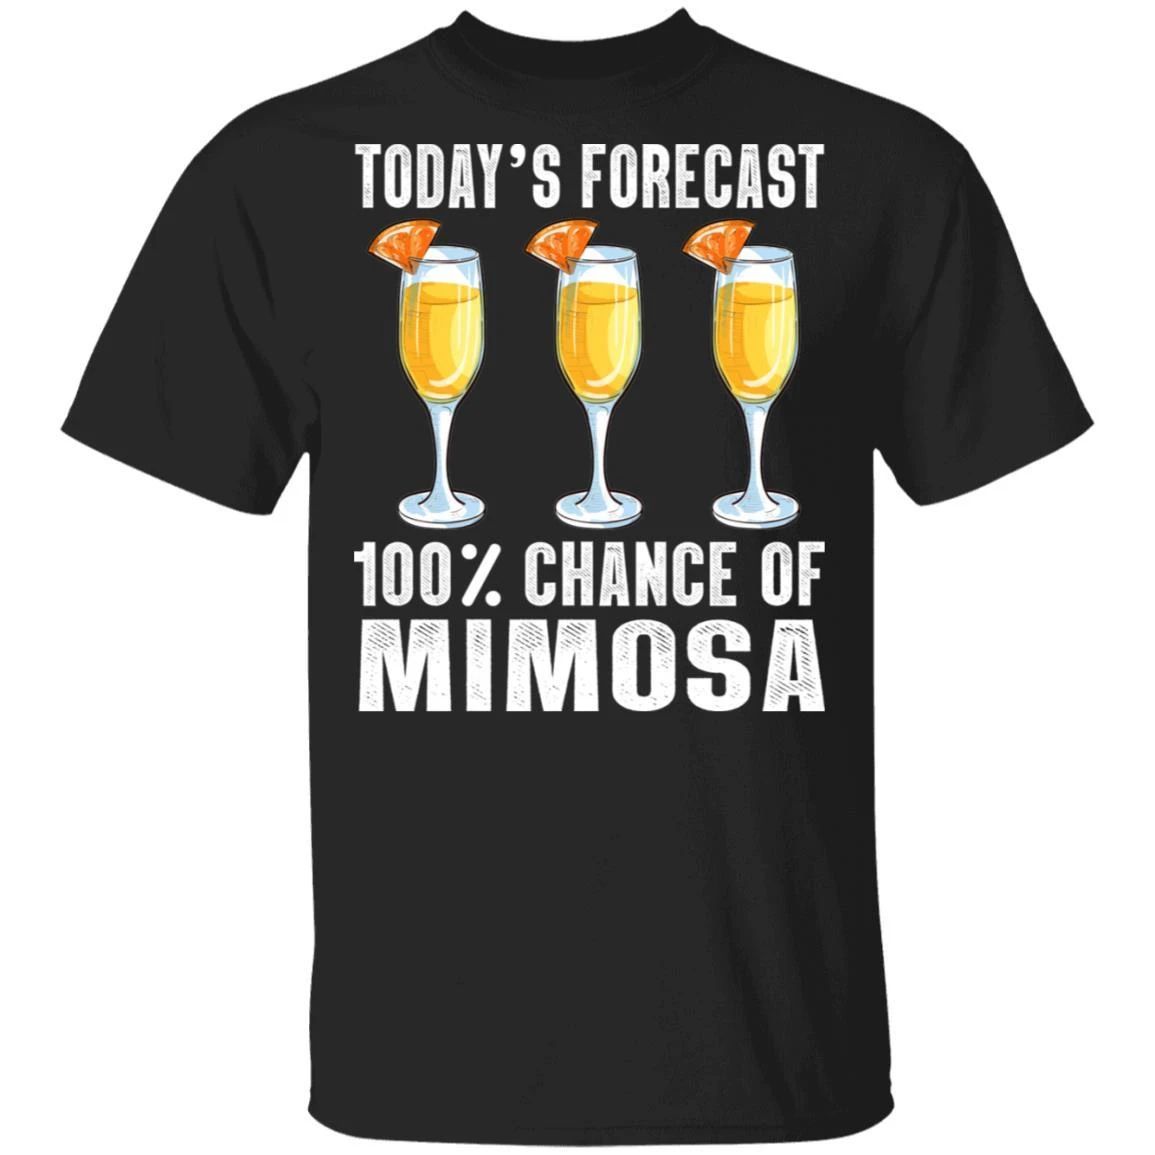 Today’s Forecast 100% Mimosa T-shirt Cocktail Tee